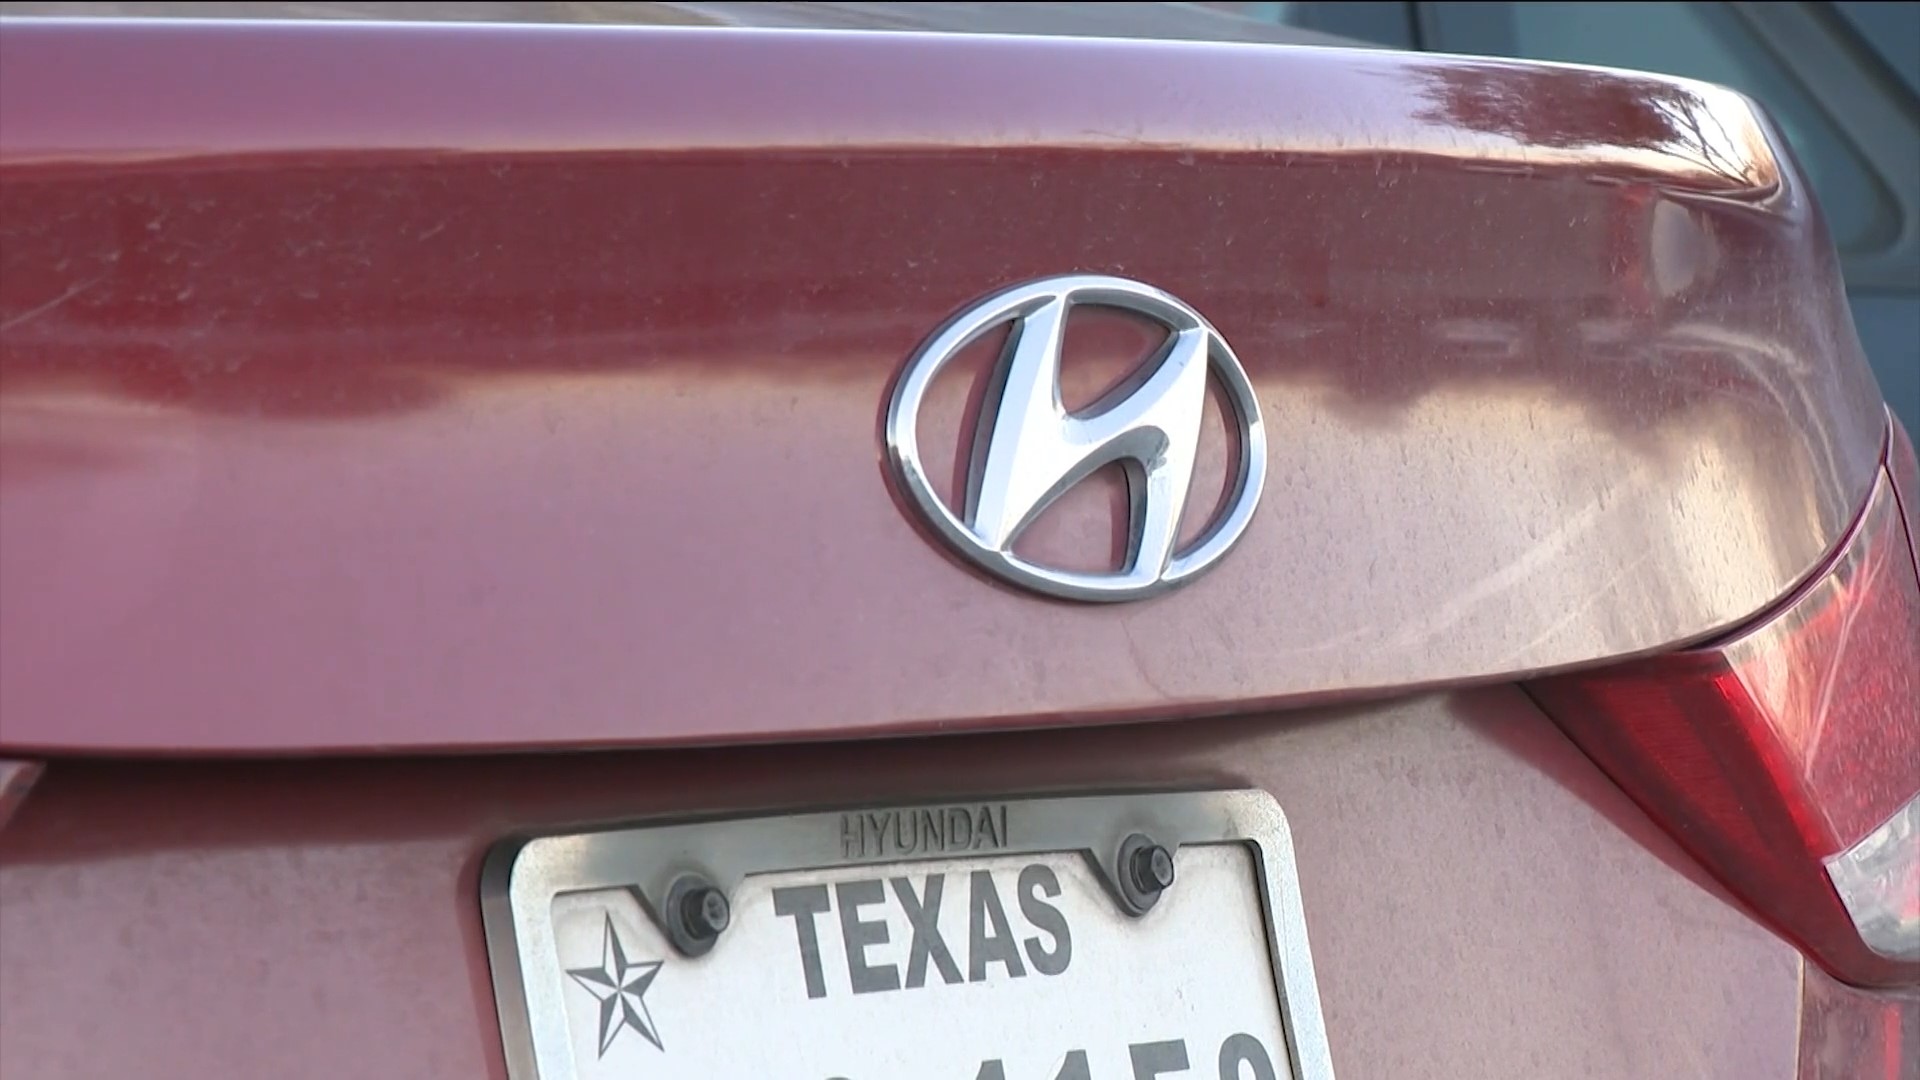 The City of Austin passed a resolution encouraging the National Highway Traffic Safety Administration to recall the vehicles prone to thefts.